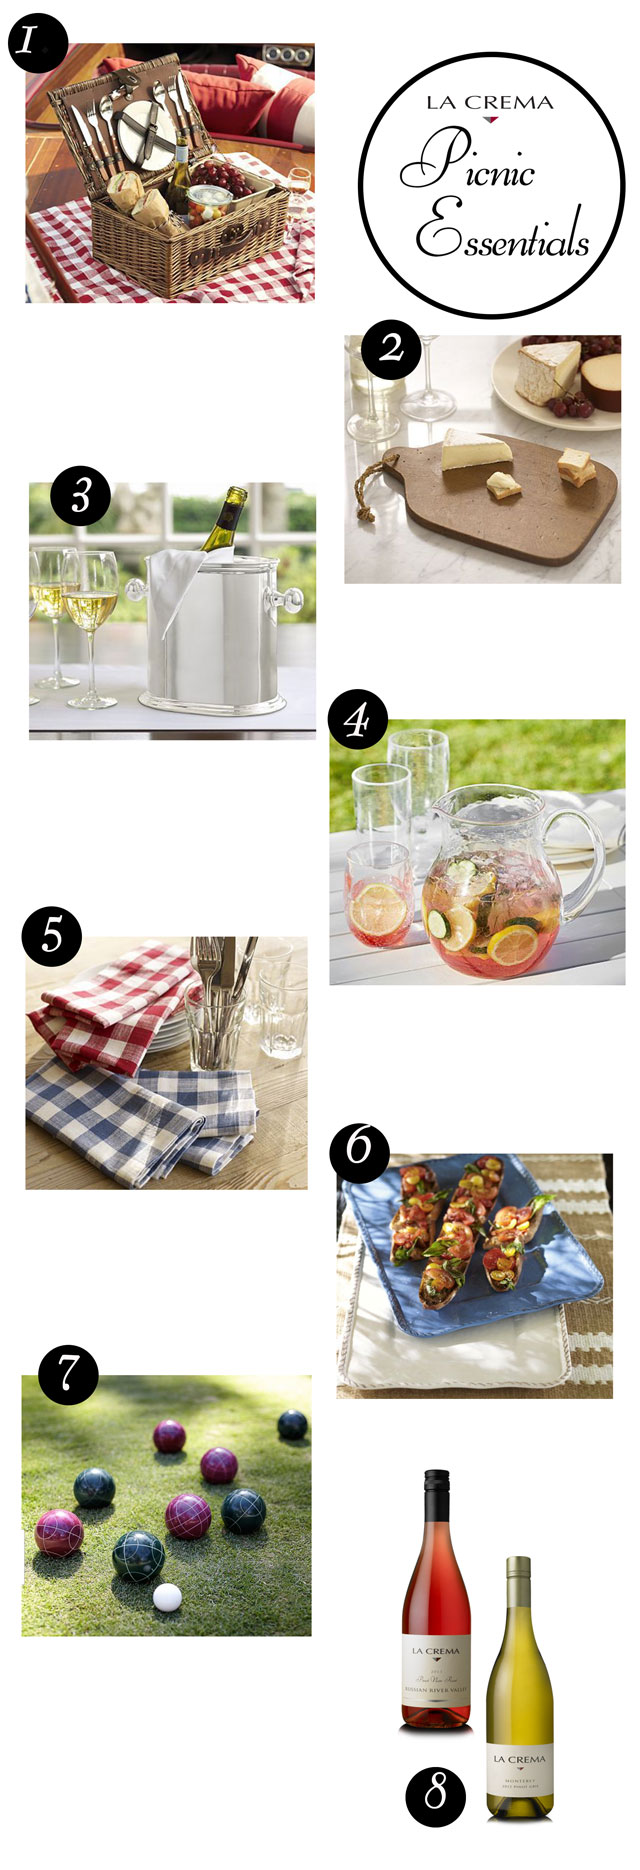 Summertime is the perfect reason to have a lazy picnic full of sunshine, good food, great friends and of course delicious wine. Here are my picks from Pottery Barn that will help you create the perfect picnic.